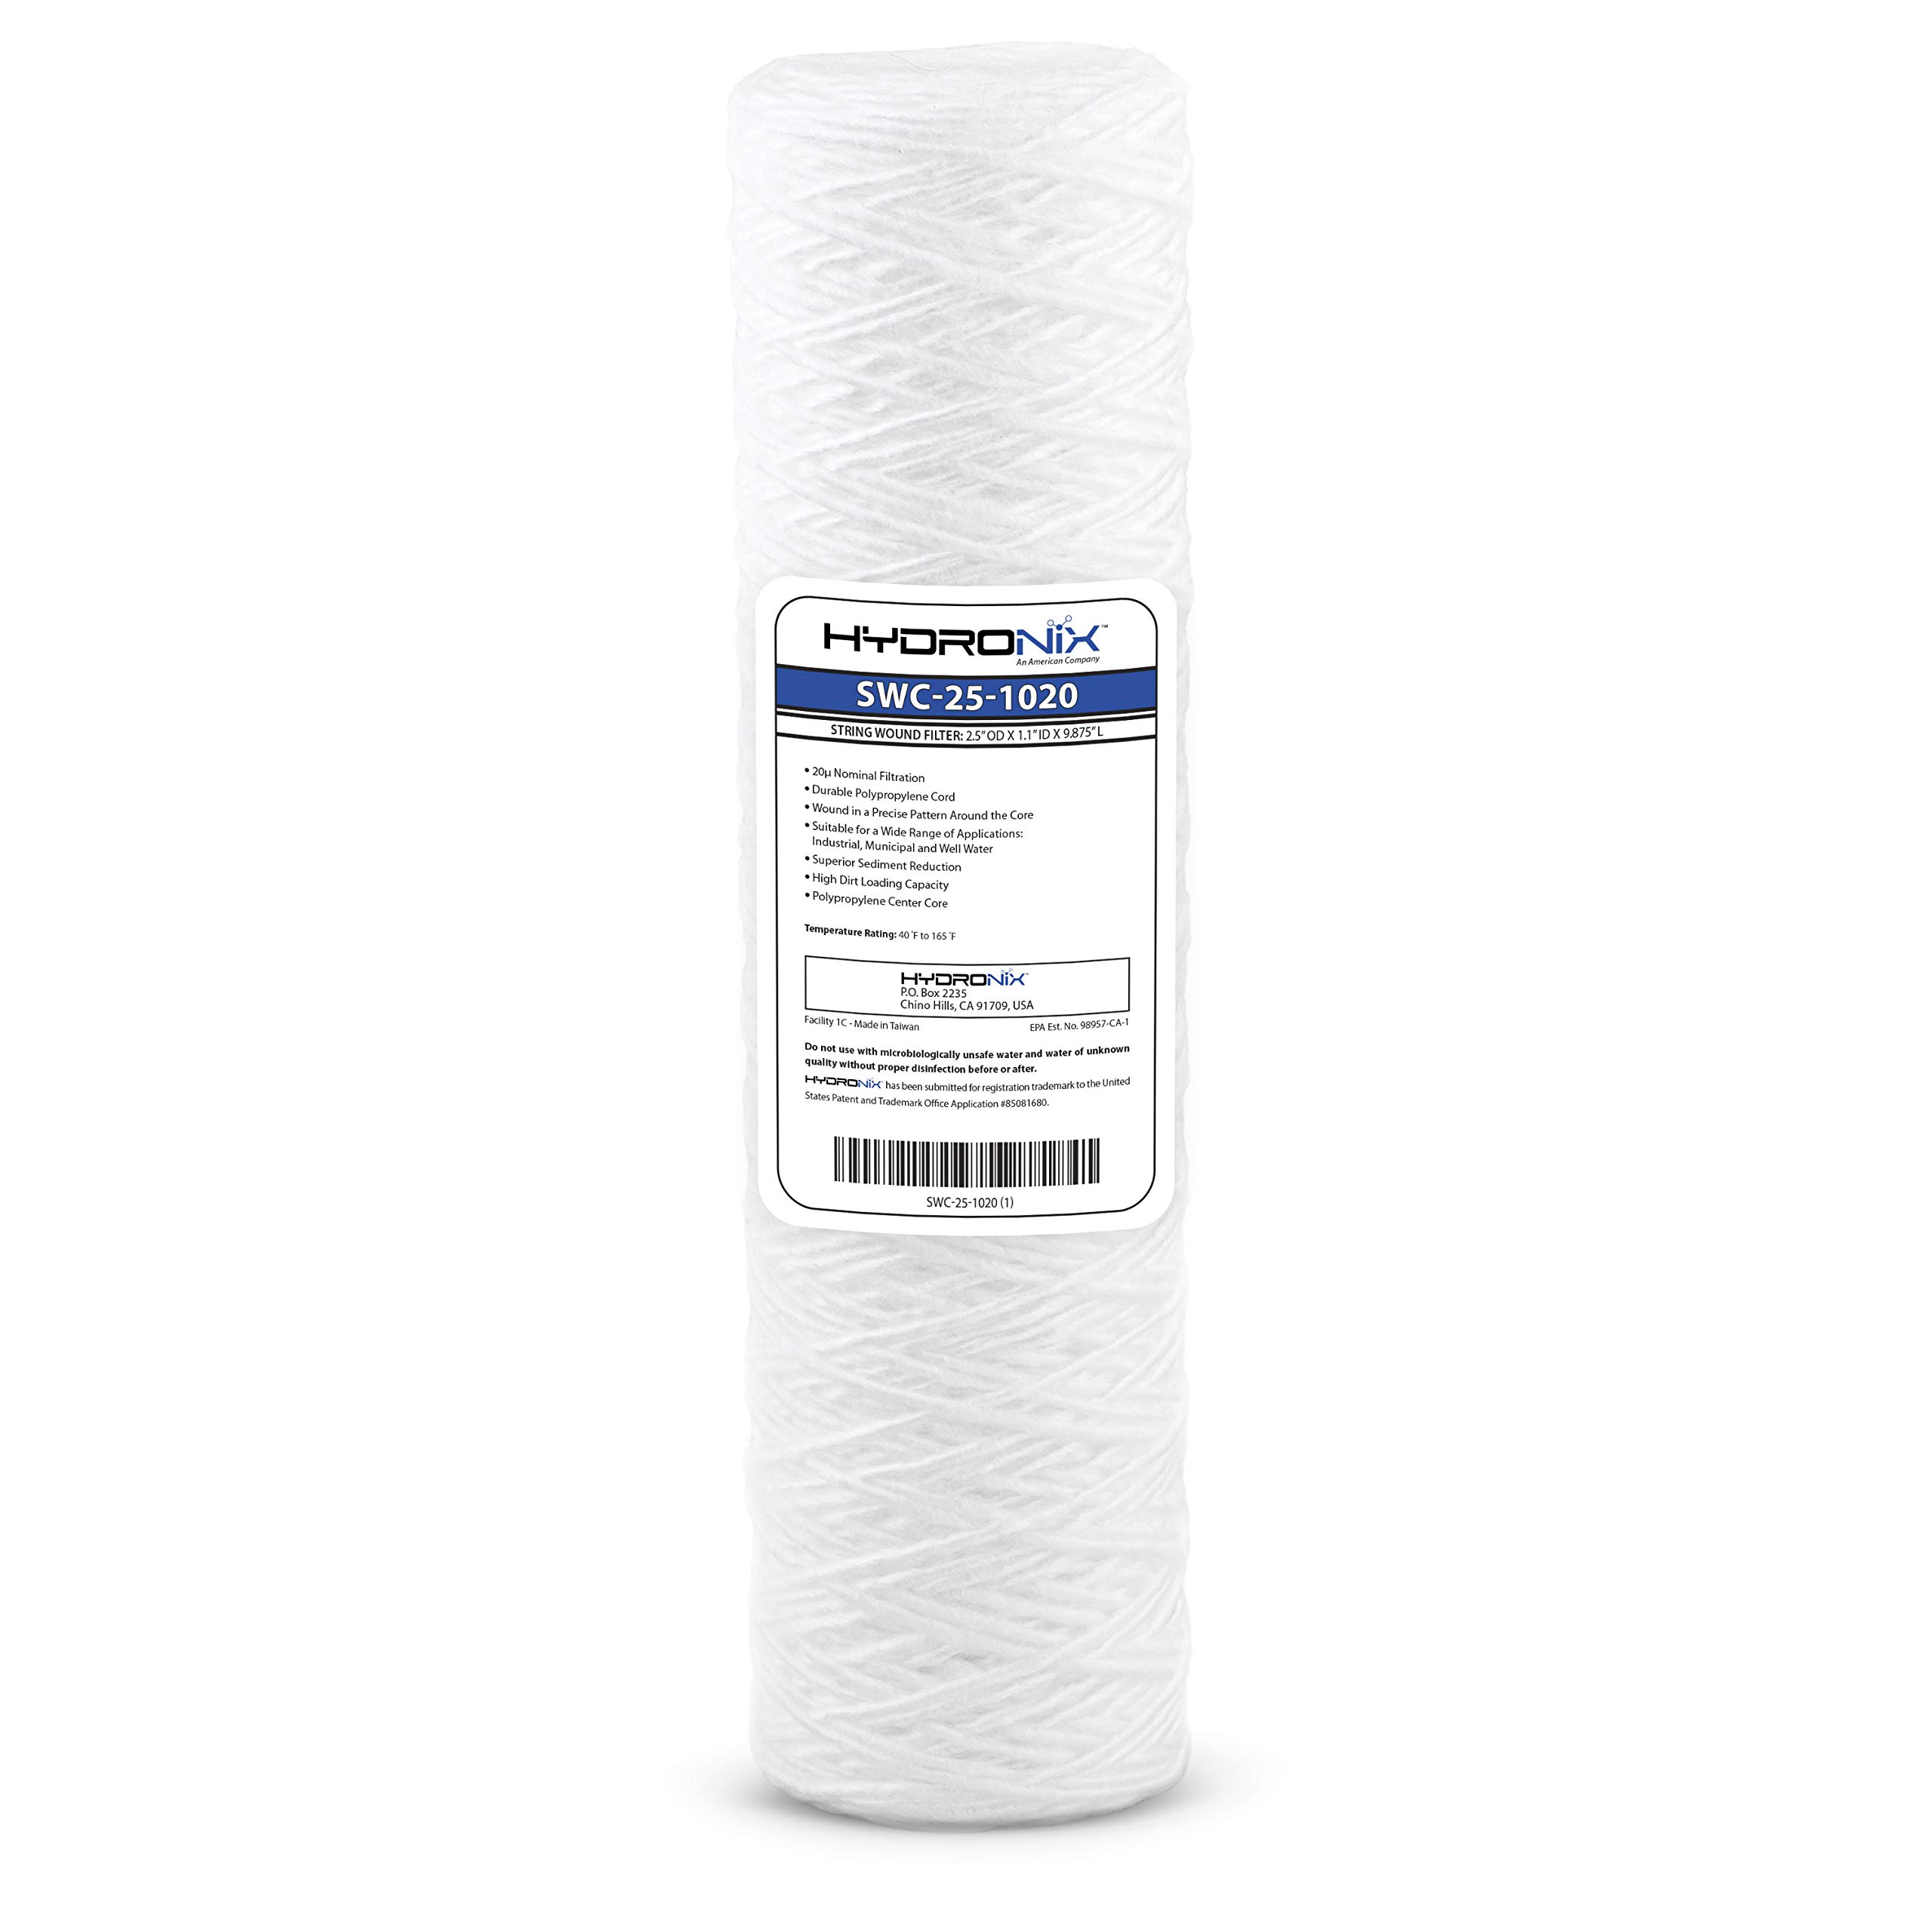 Hydronix SWC-25-1020 Universal Whole House String Wound Sediment Water Filter Cartridge 2.5" x 10" - 20 Micron